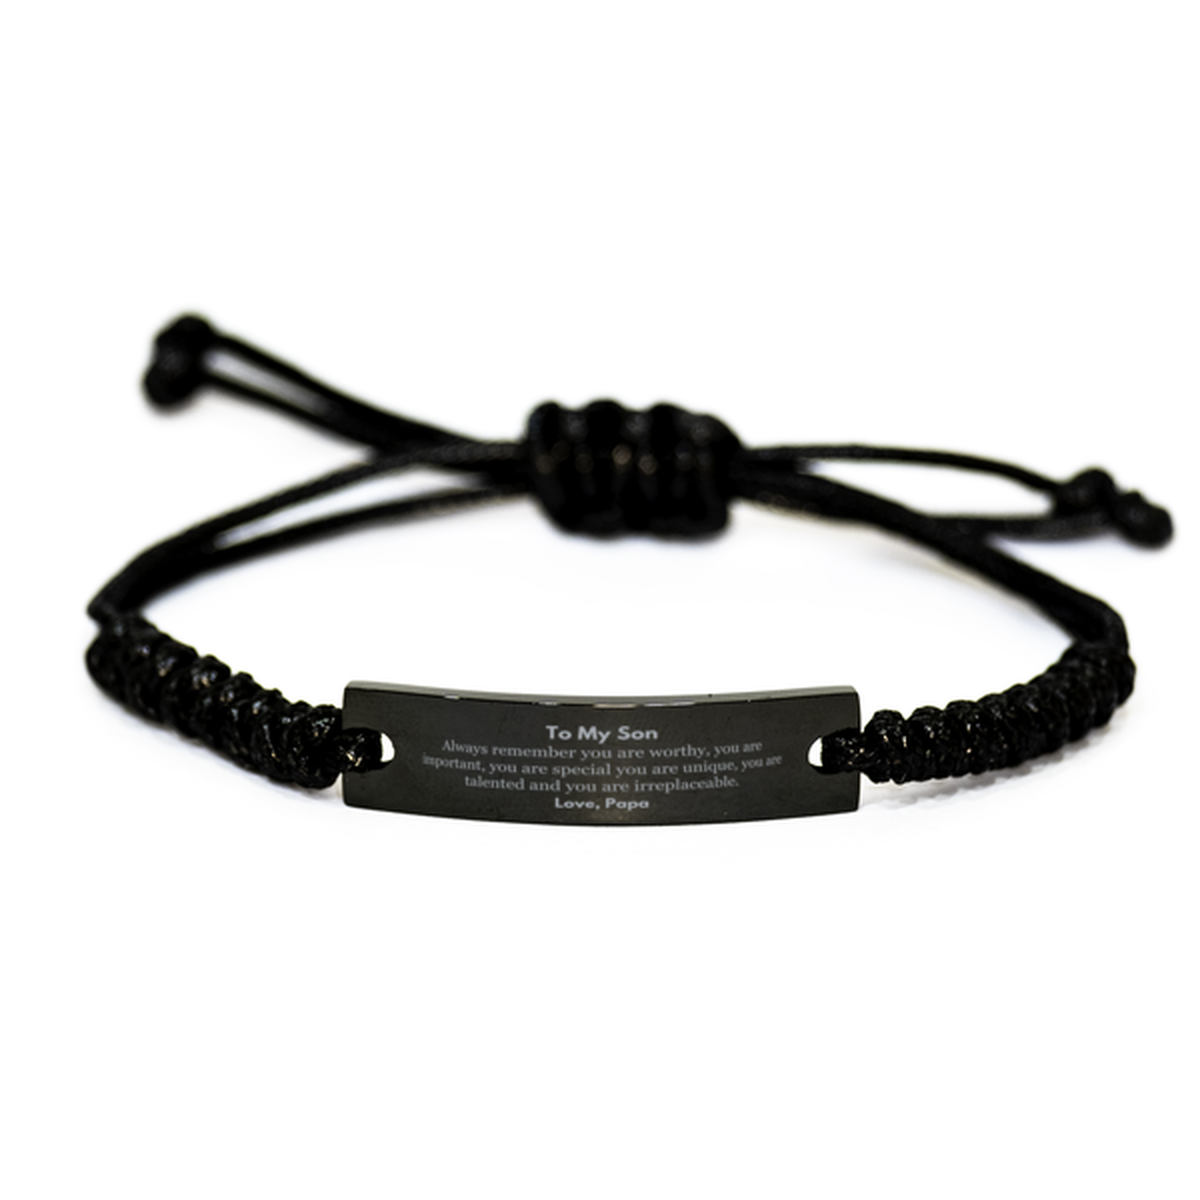 Son Birthday Gifts from Papa, Inspirational Black Rope Bracelet for Son Christmas Graduation Gifts for Son Always remember you are worthy, you are important. Love, Papa